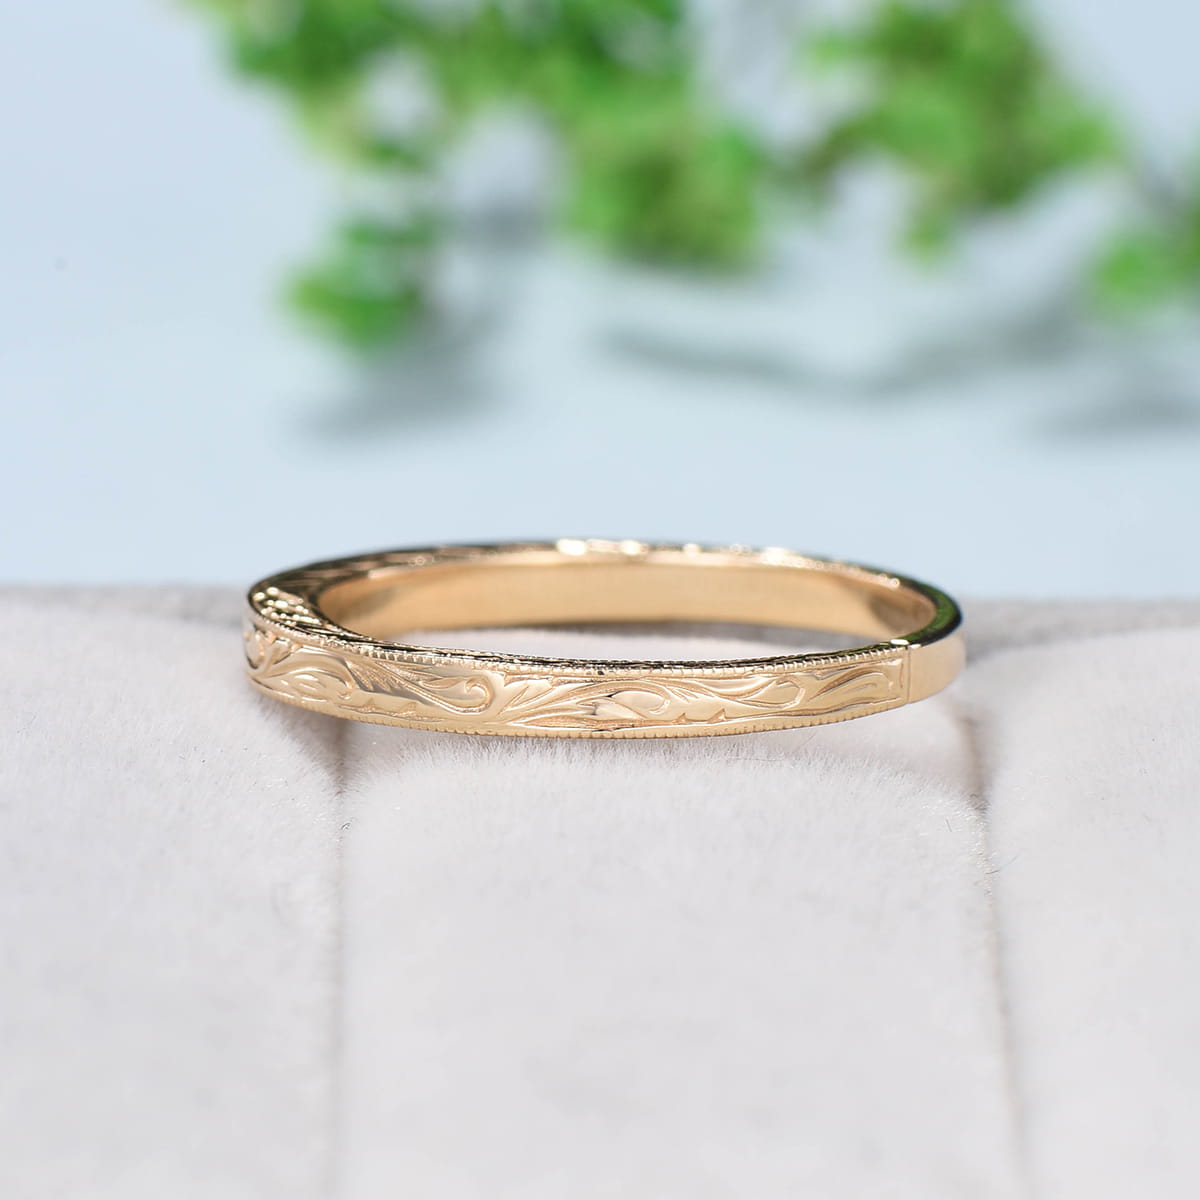 Pretty Sun and Crescent Moon Name Engraved Couple Rings |